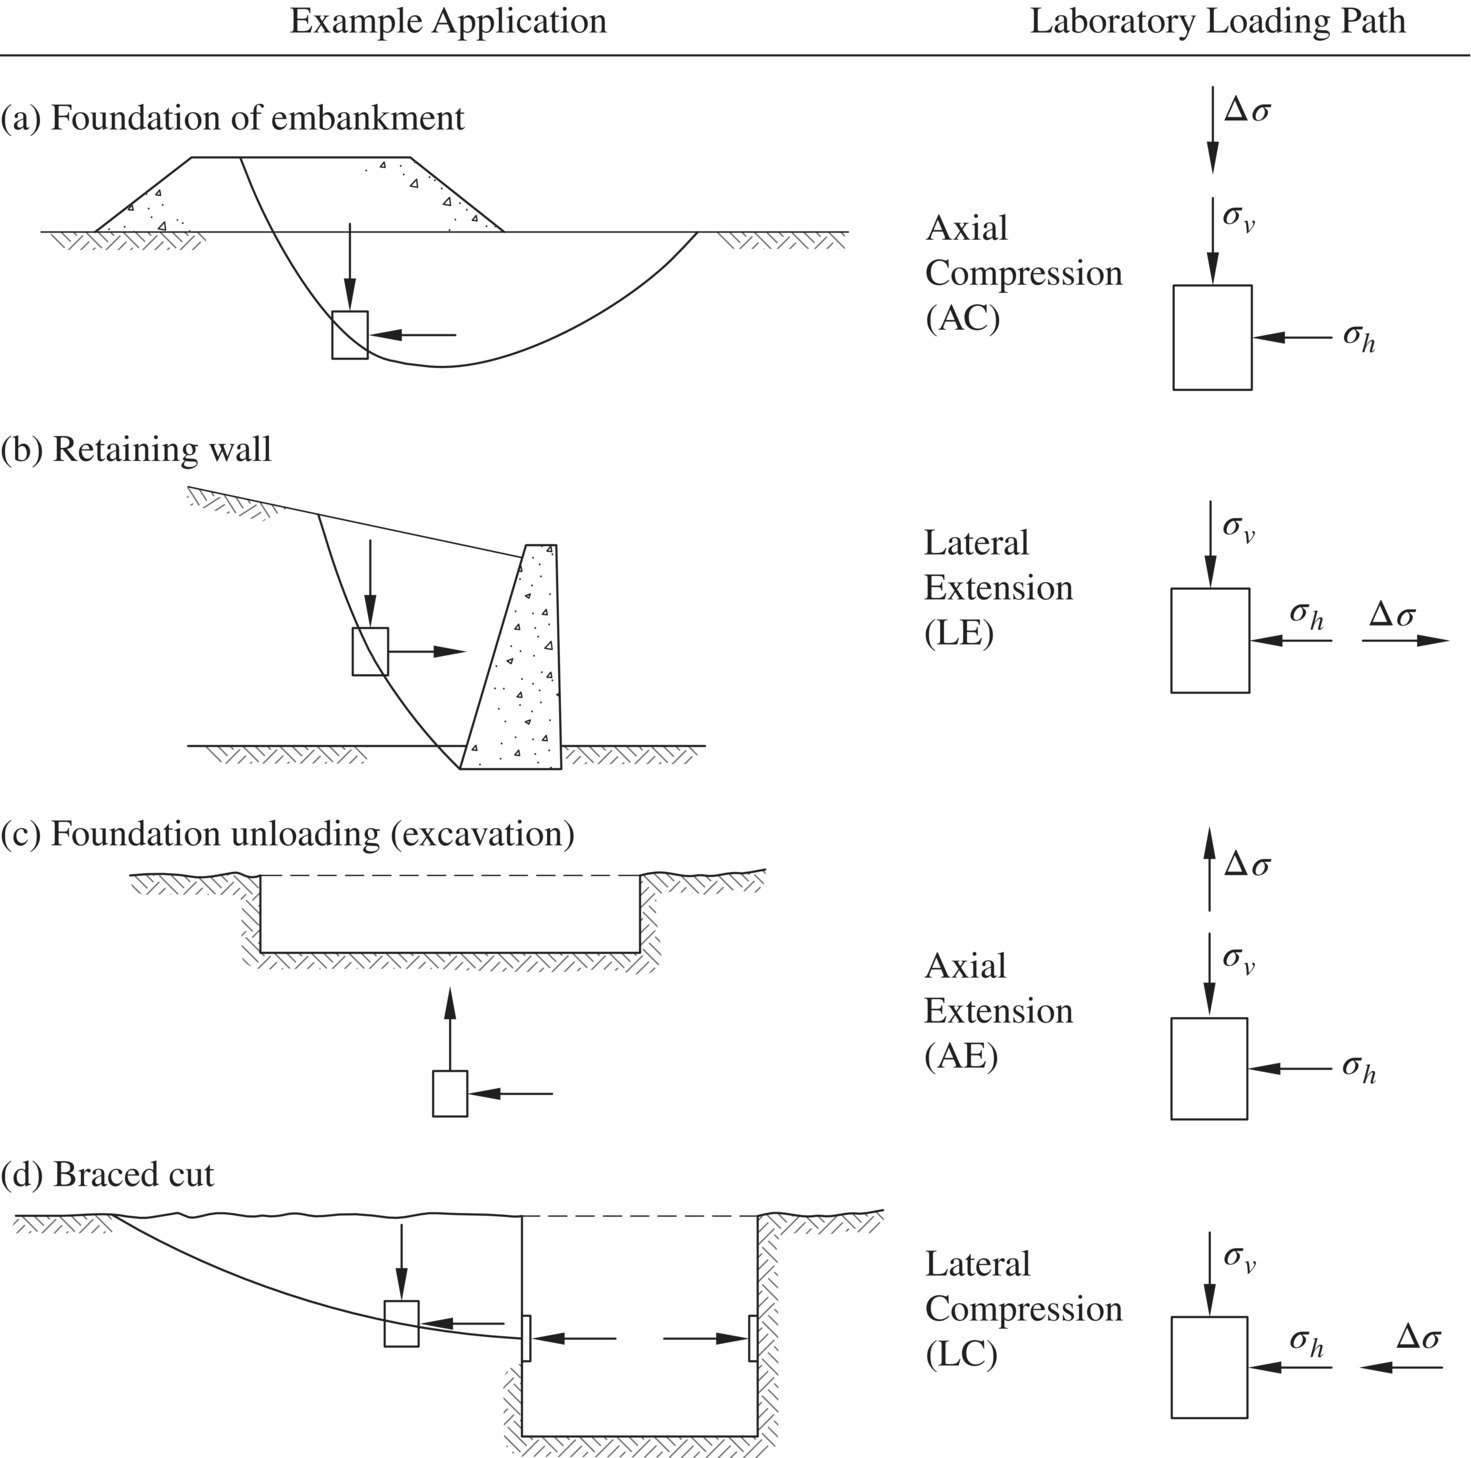 Schematic displaying a table with columns for example application and laboratory loading path, illustrating foundation embankment, retaining wall, foundation unloading, and braced cut (top–bottom).